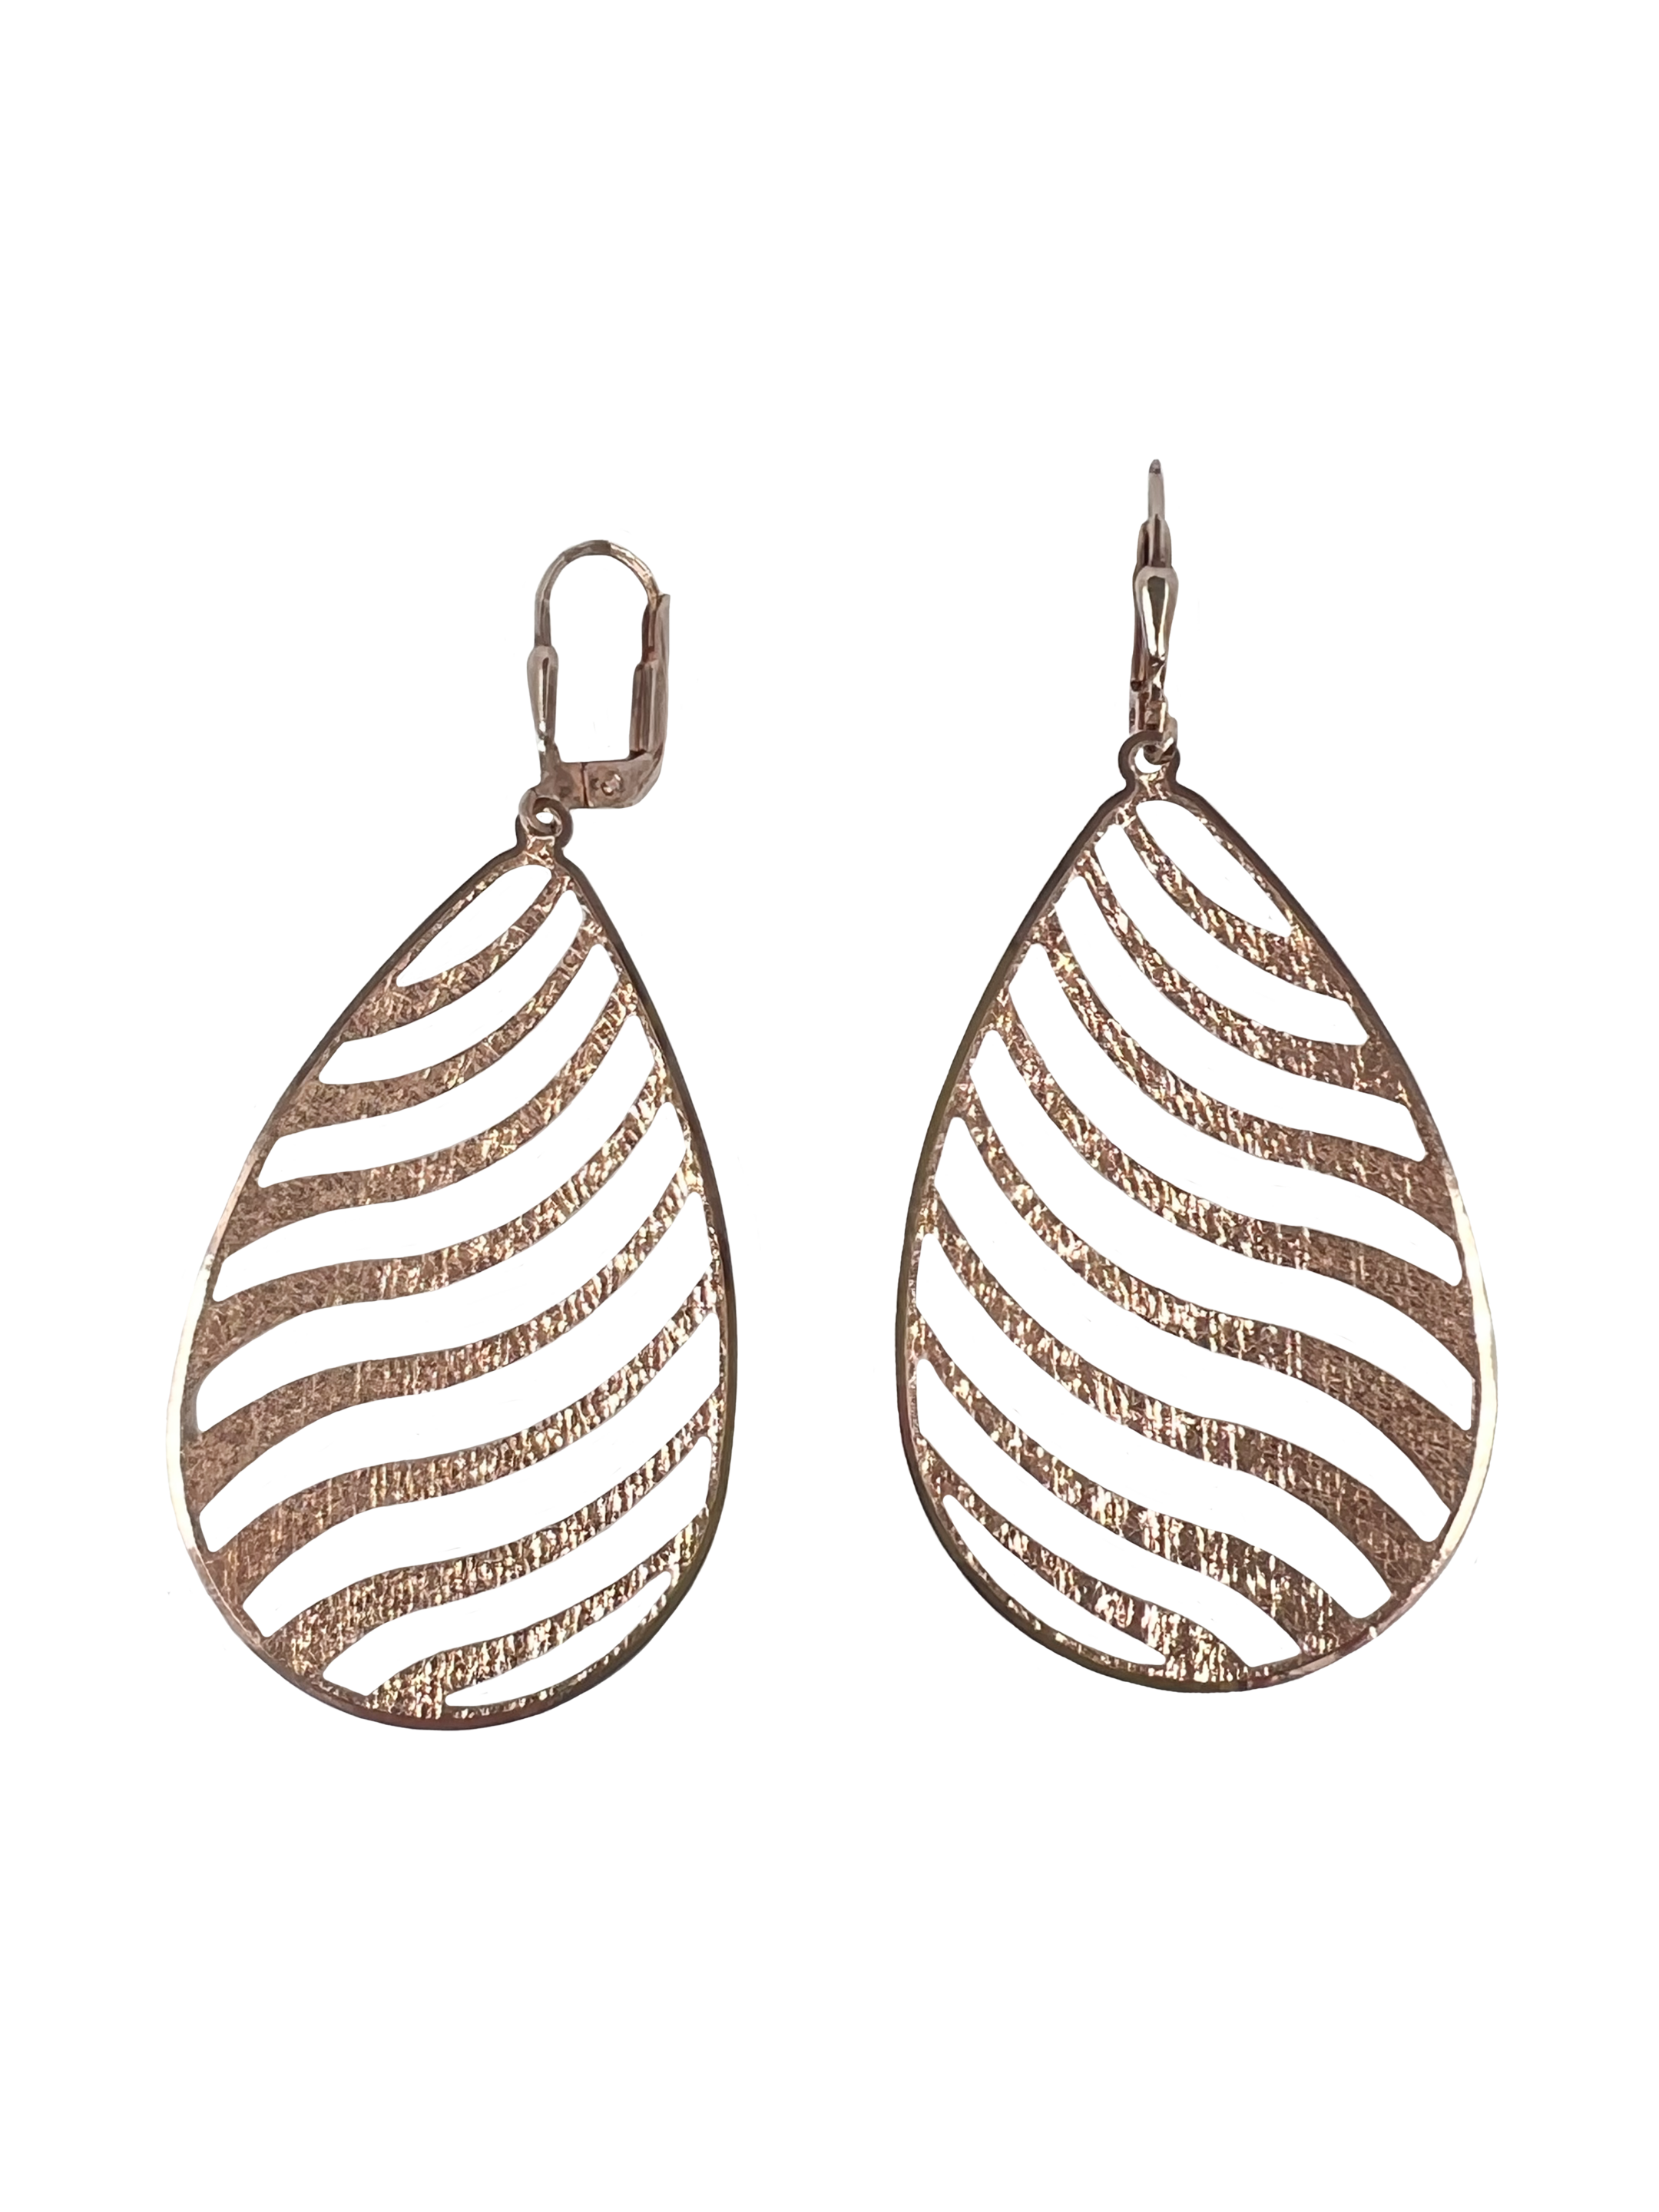 Silver dangling earrings with surface treatment